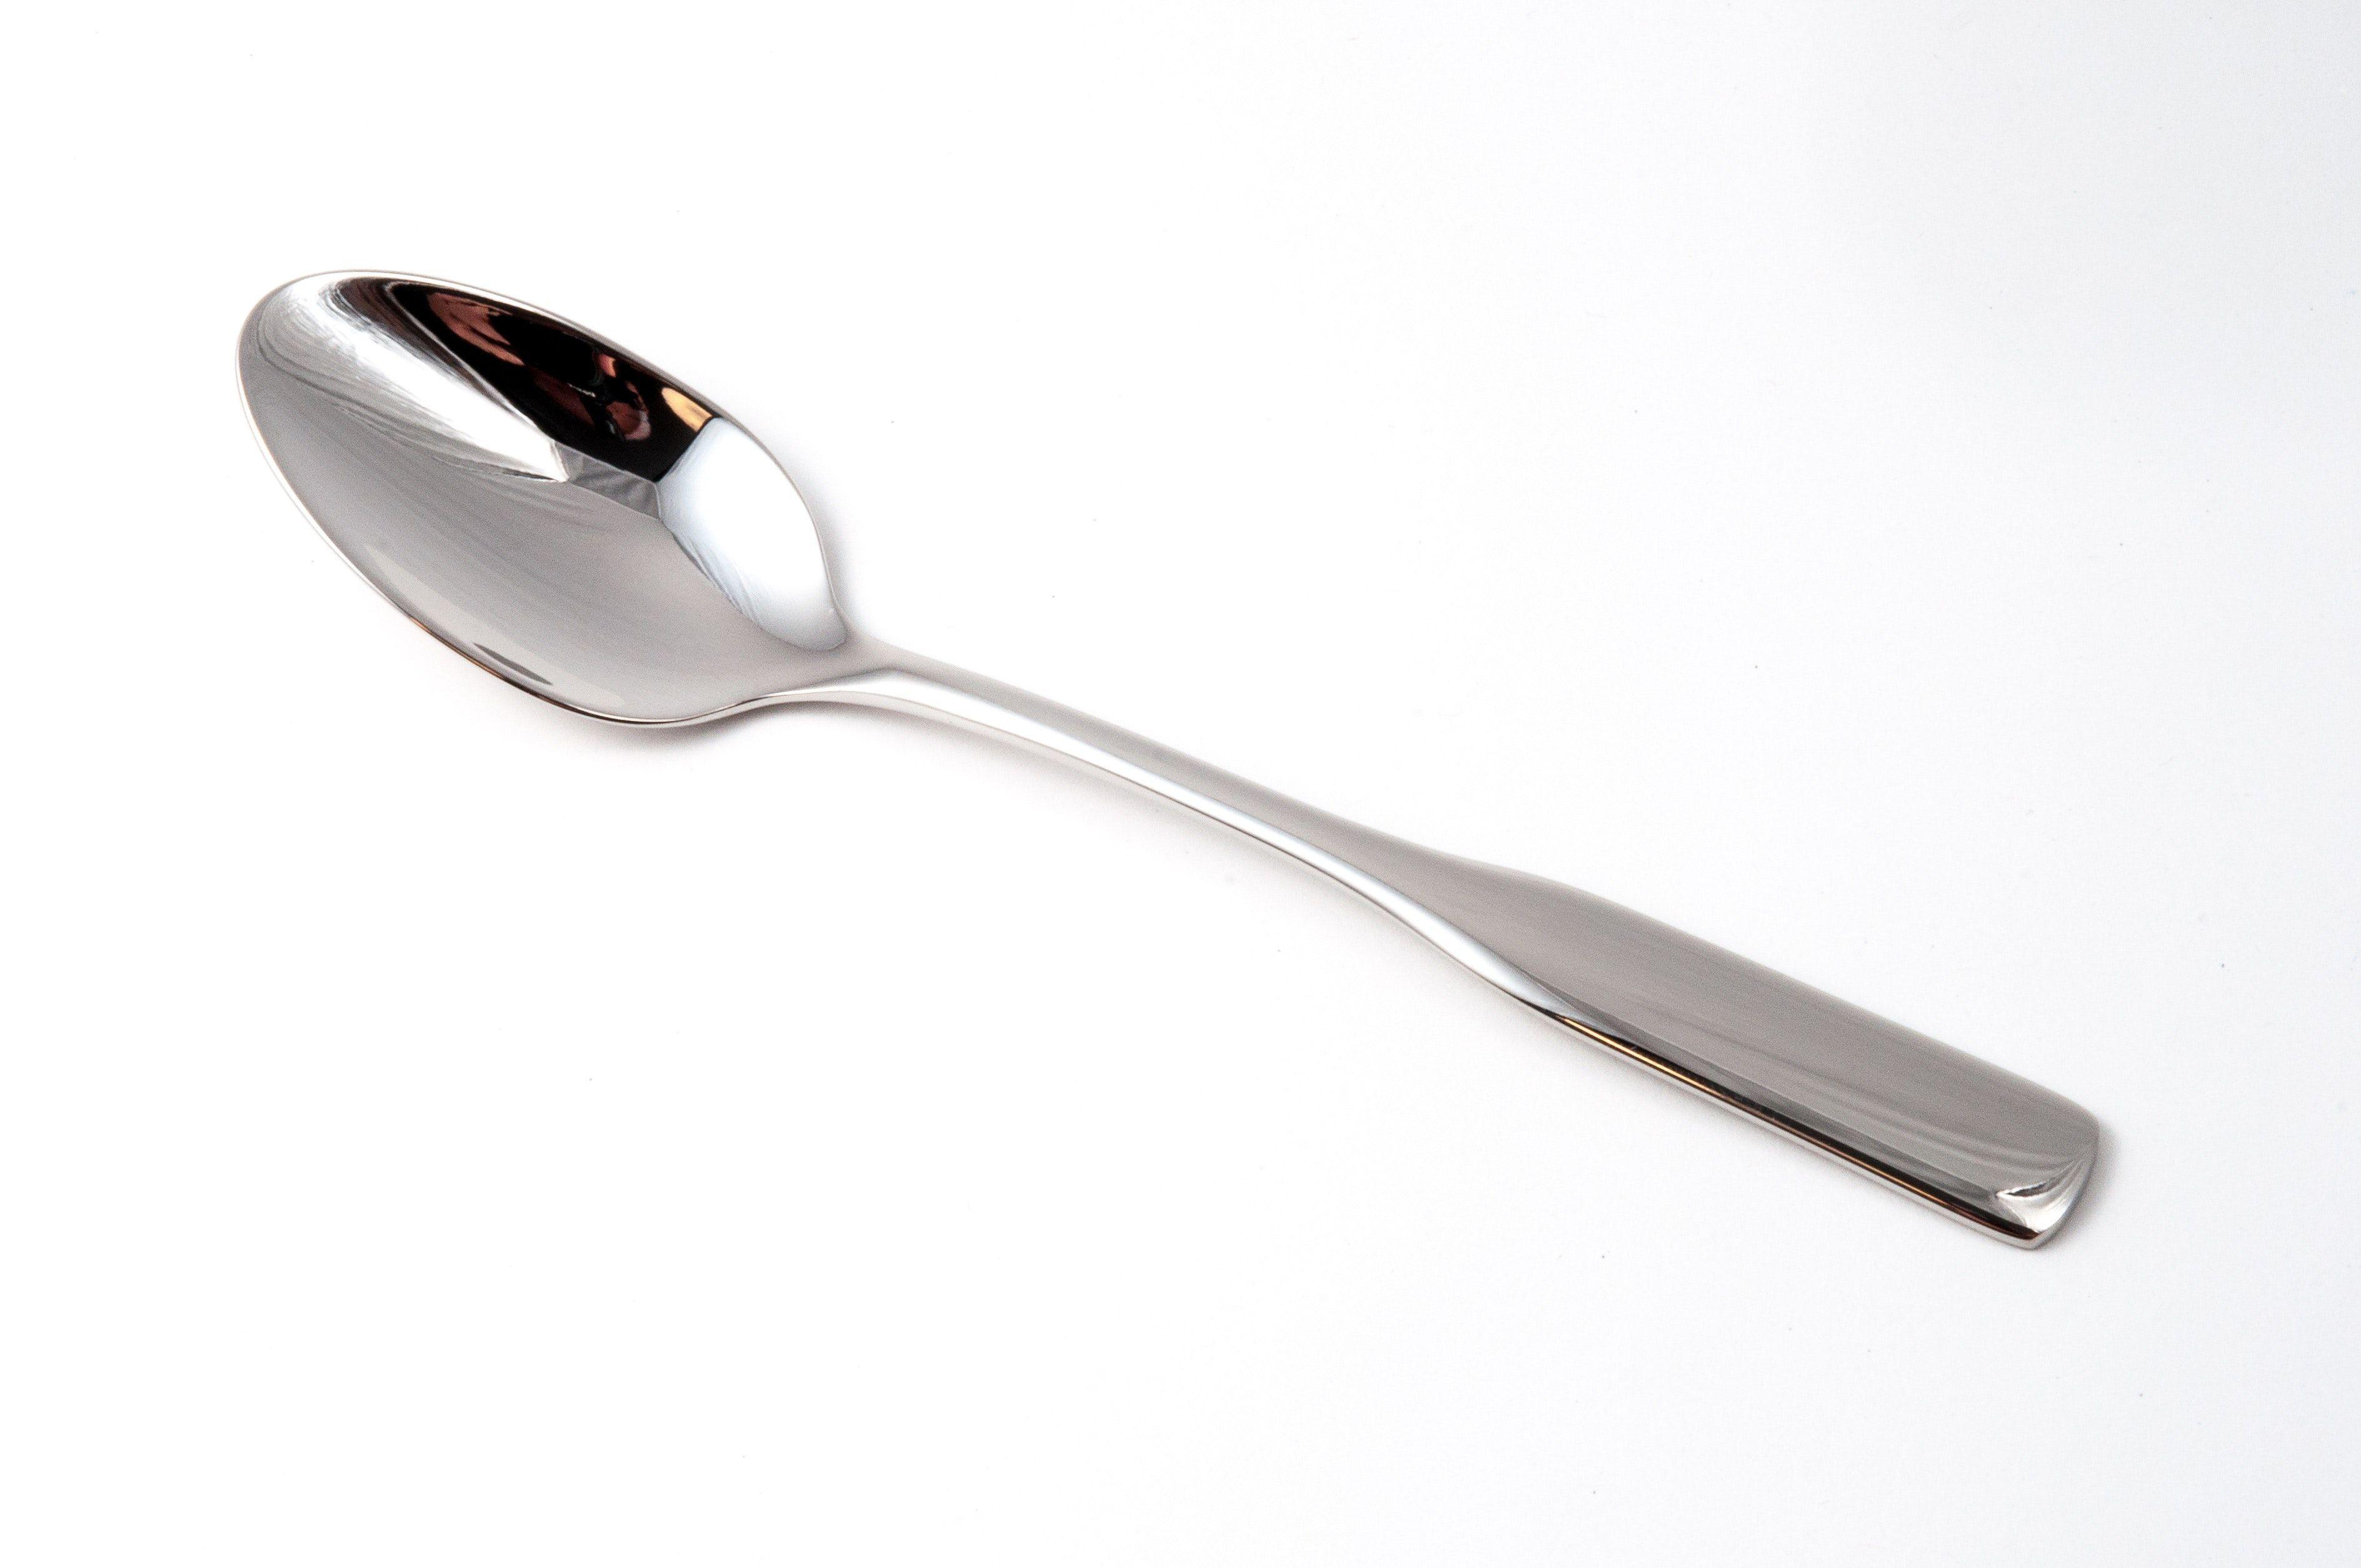 Spoon Photos Download The BEST Free Spoon Stock Photos  HD Images